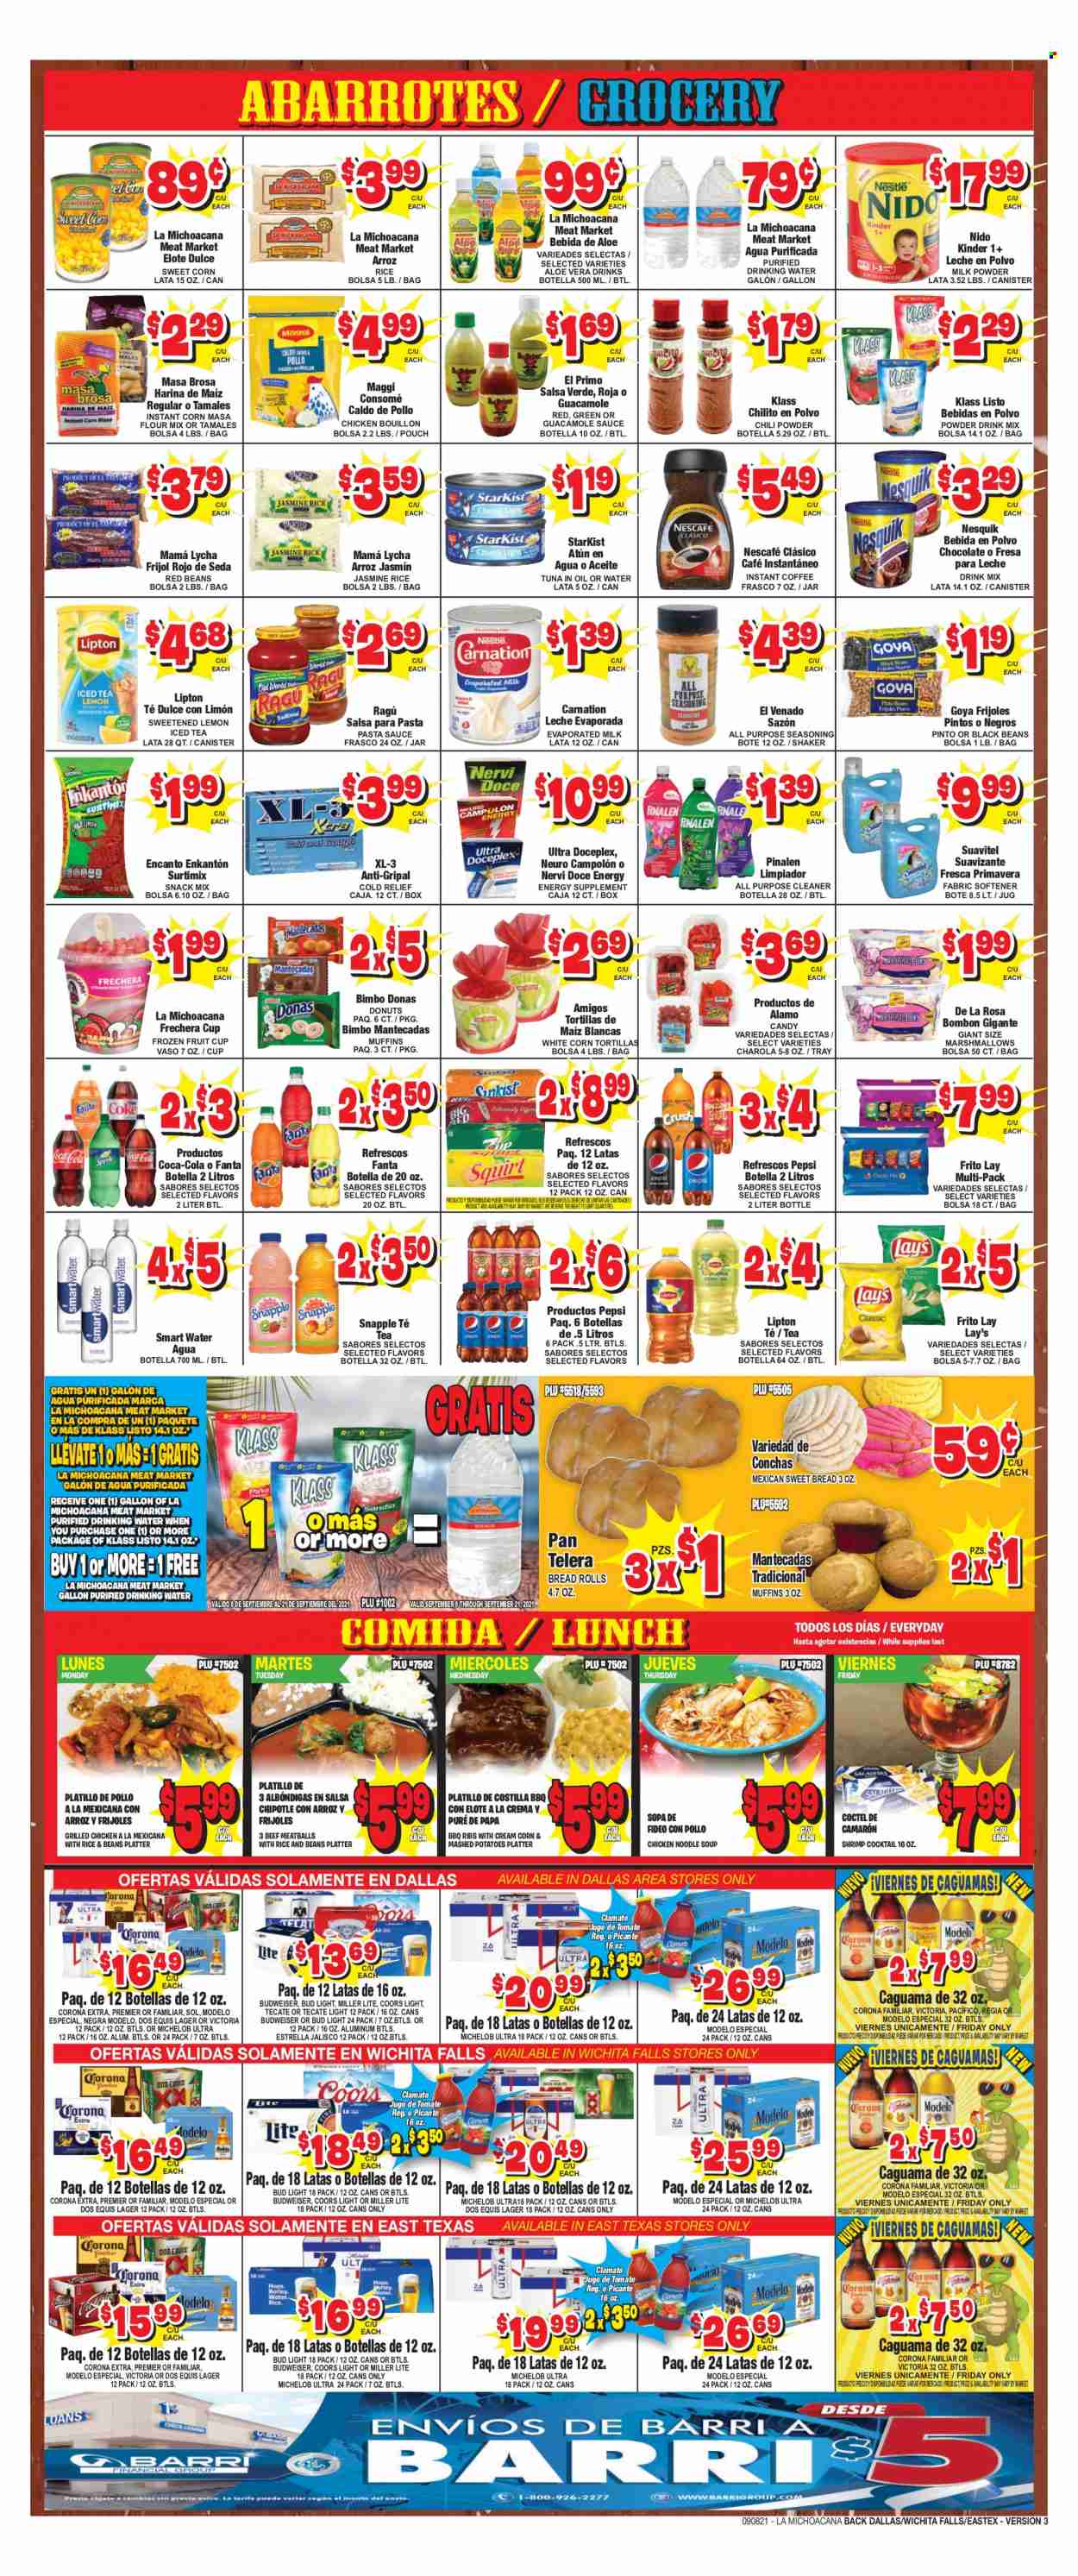 thumbnail - La Michoacana Meat Market Flyer - 09/08/2021 - 09/21/2021 - Sales products - corn tortillas, tortillas, sweet bread, donut, muffin, sweet corn, fruit cup, tuna, shrimps, StarKist, mashed potatoes, pasta sauce, meatballs, soup, sauce, noodles cup, guacamole, Nesquik, evaporated milk, milk powder, frozen fruit, marshmallows, Nestlé, Candy, Lay’s, salty snack, bouillon, Maggi, black beans, red beans, Goya, jasmine rice, spice, salsa, ragu, Coca-Cola, Pepsi, Fanta, Lipton, fruit drink, ice tea, Clamato, soft drink, Snapple, purified water, Smartwater, water, aloe vera, carbonated soft drink, powder drink, coffee, instant coffee, Nescafé, alcohol, beer, Budweiser, Bud Light, Corona Extra, Lager, Modelo, Estrella, cleaner, all purpose cleaner, fabric softener, Suavitel, canister, pan, shaker, platters, jar, Miller Lite, Coors, Dos Equis, Michelob. Page 2.